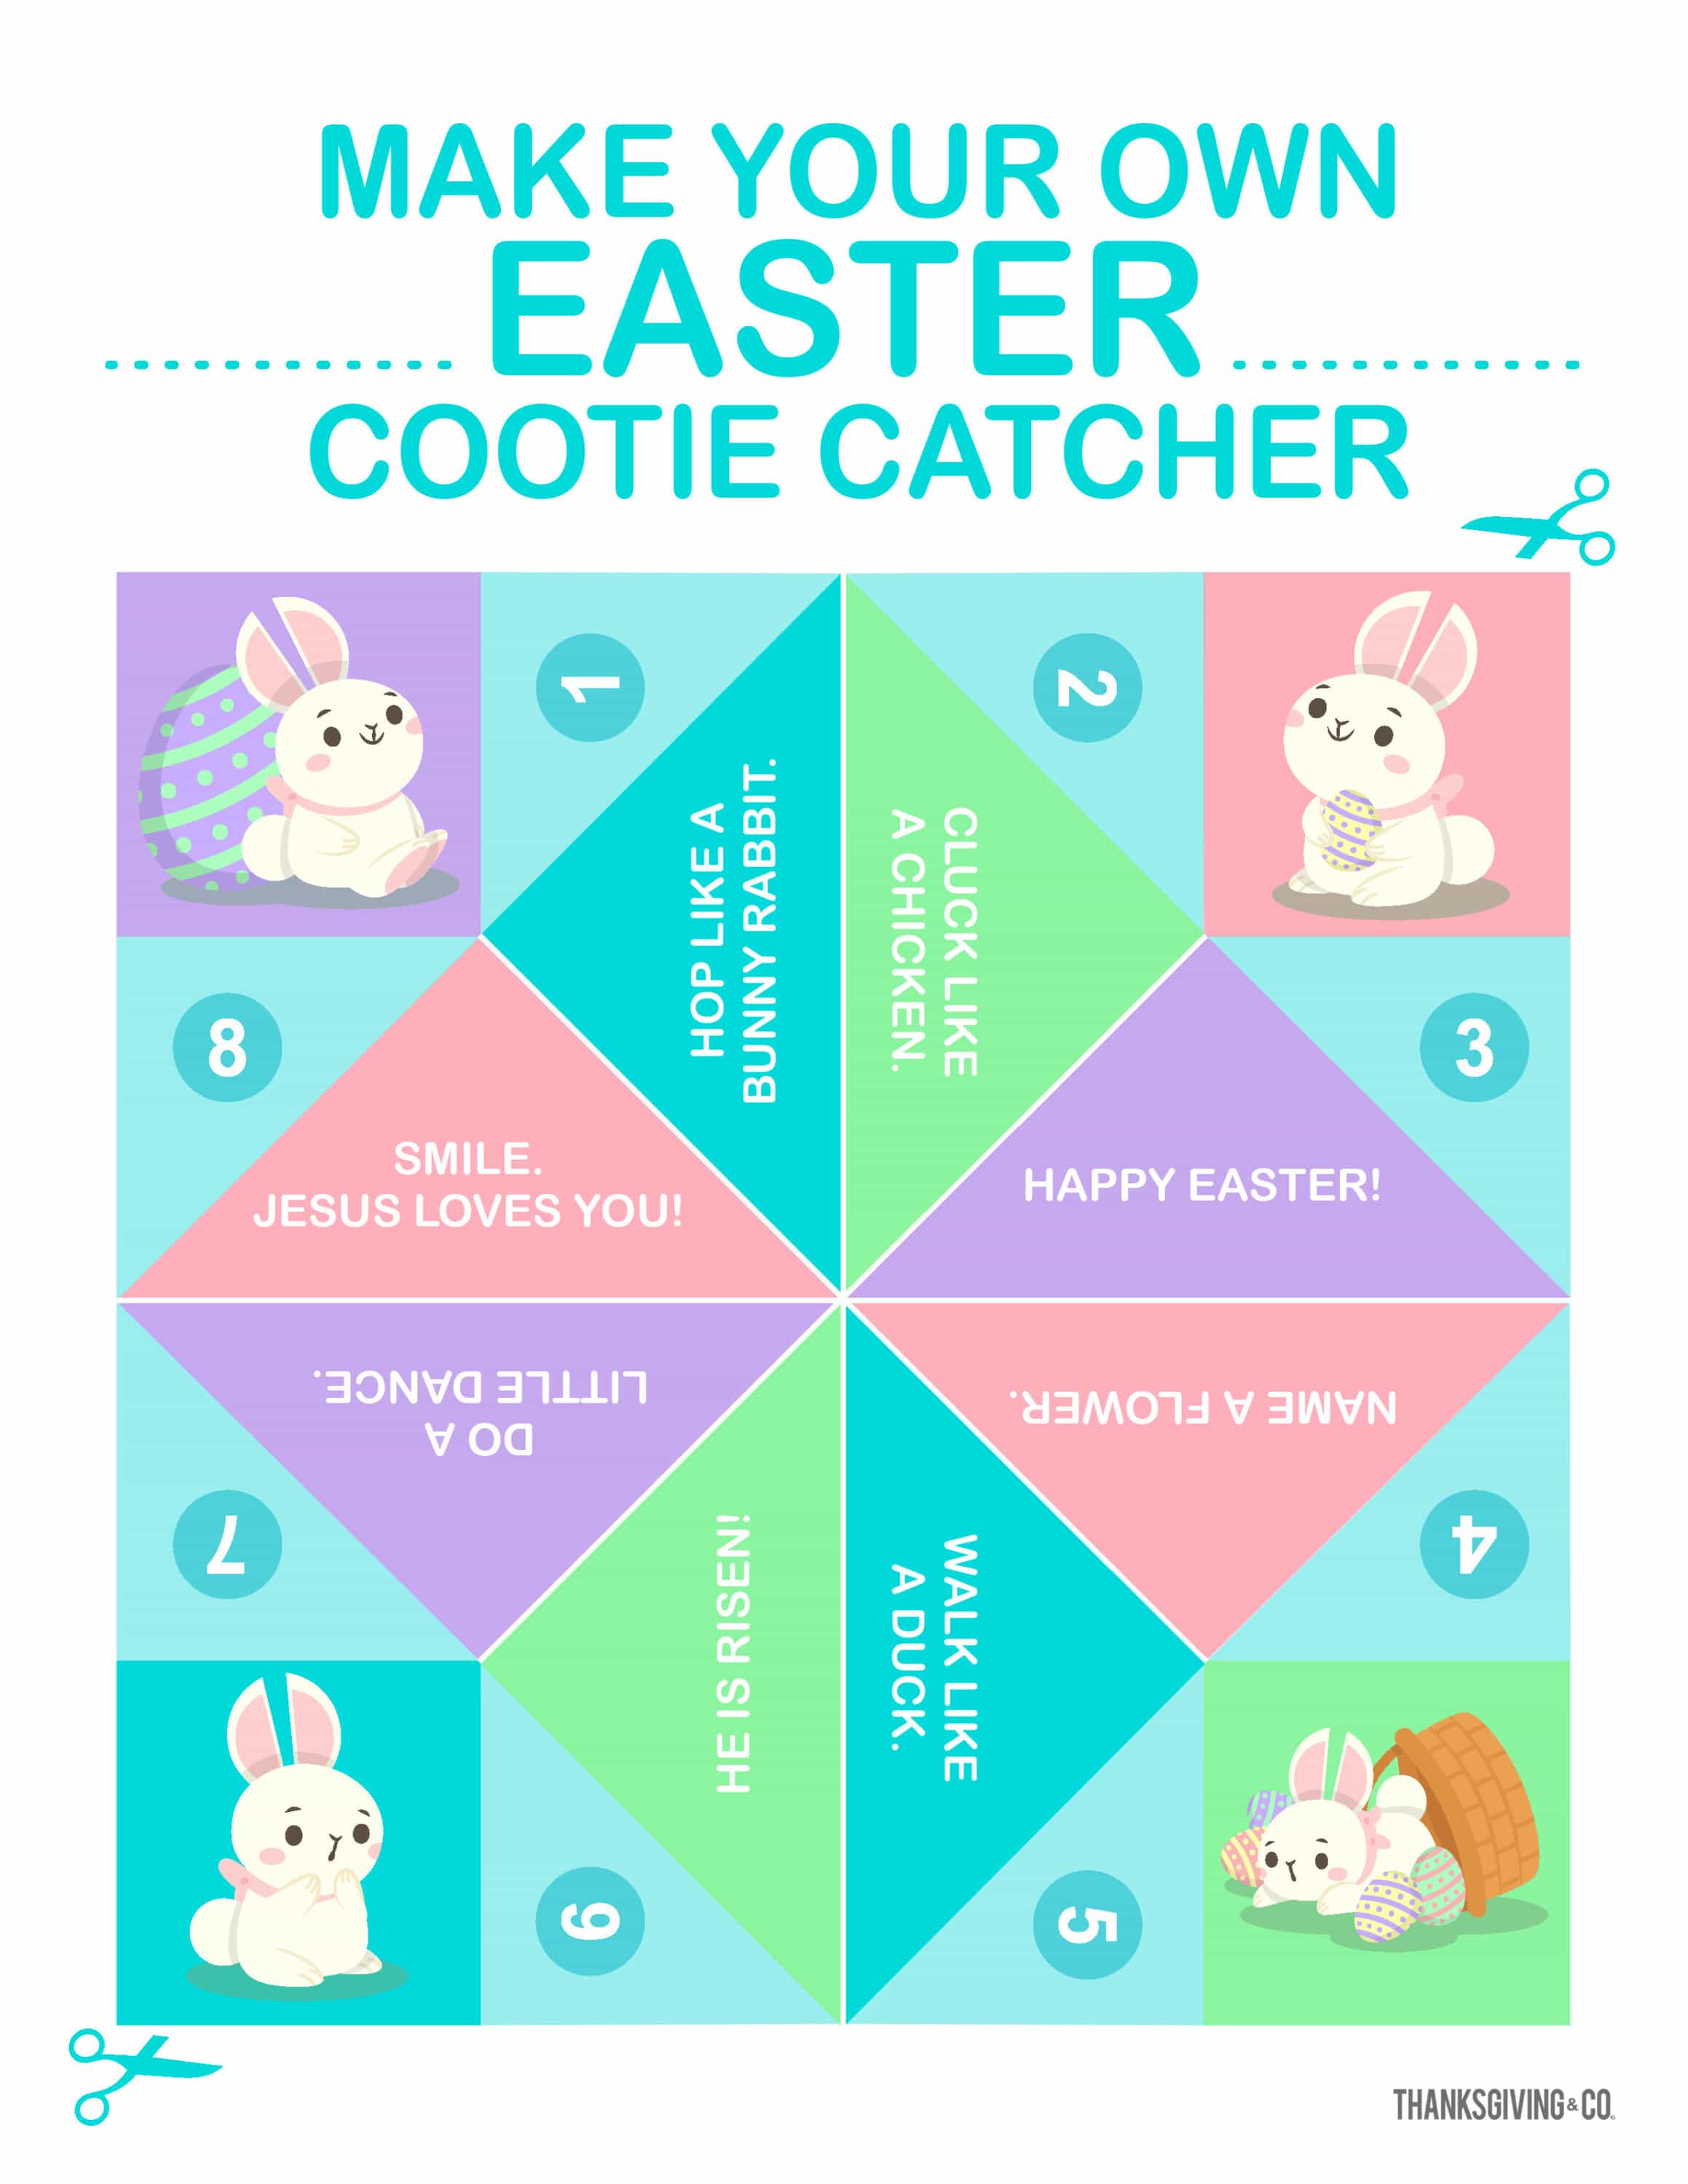 Free Printable Easter Cootie Catcher For Kids